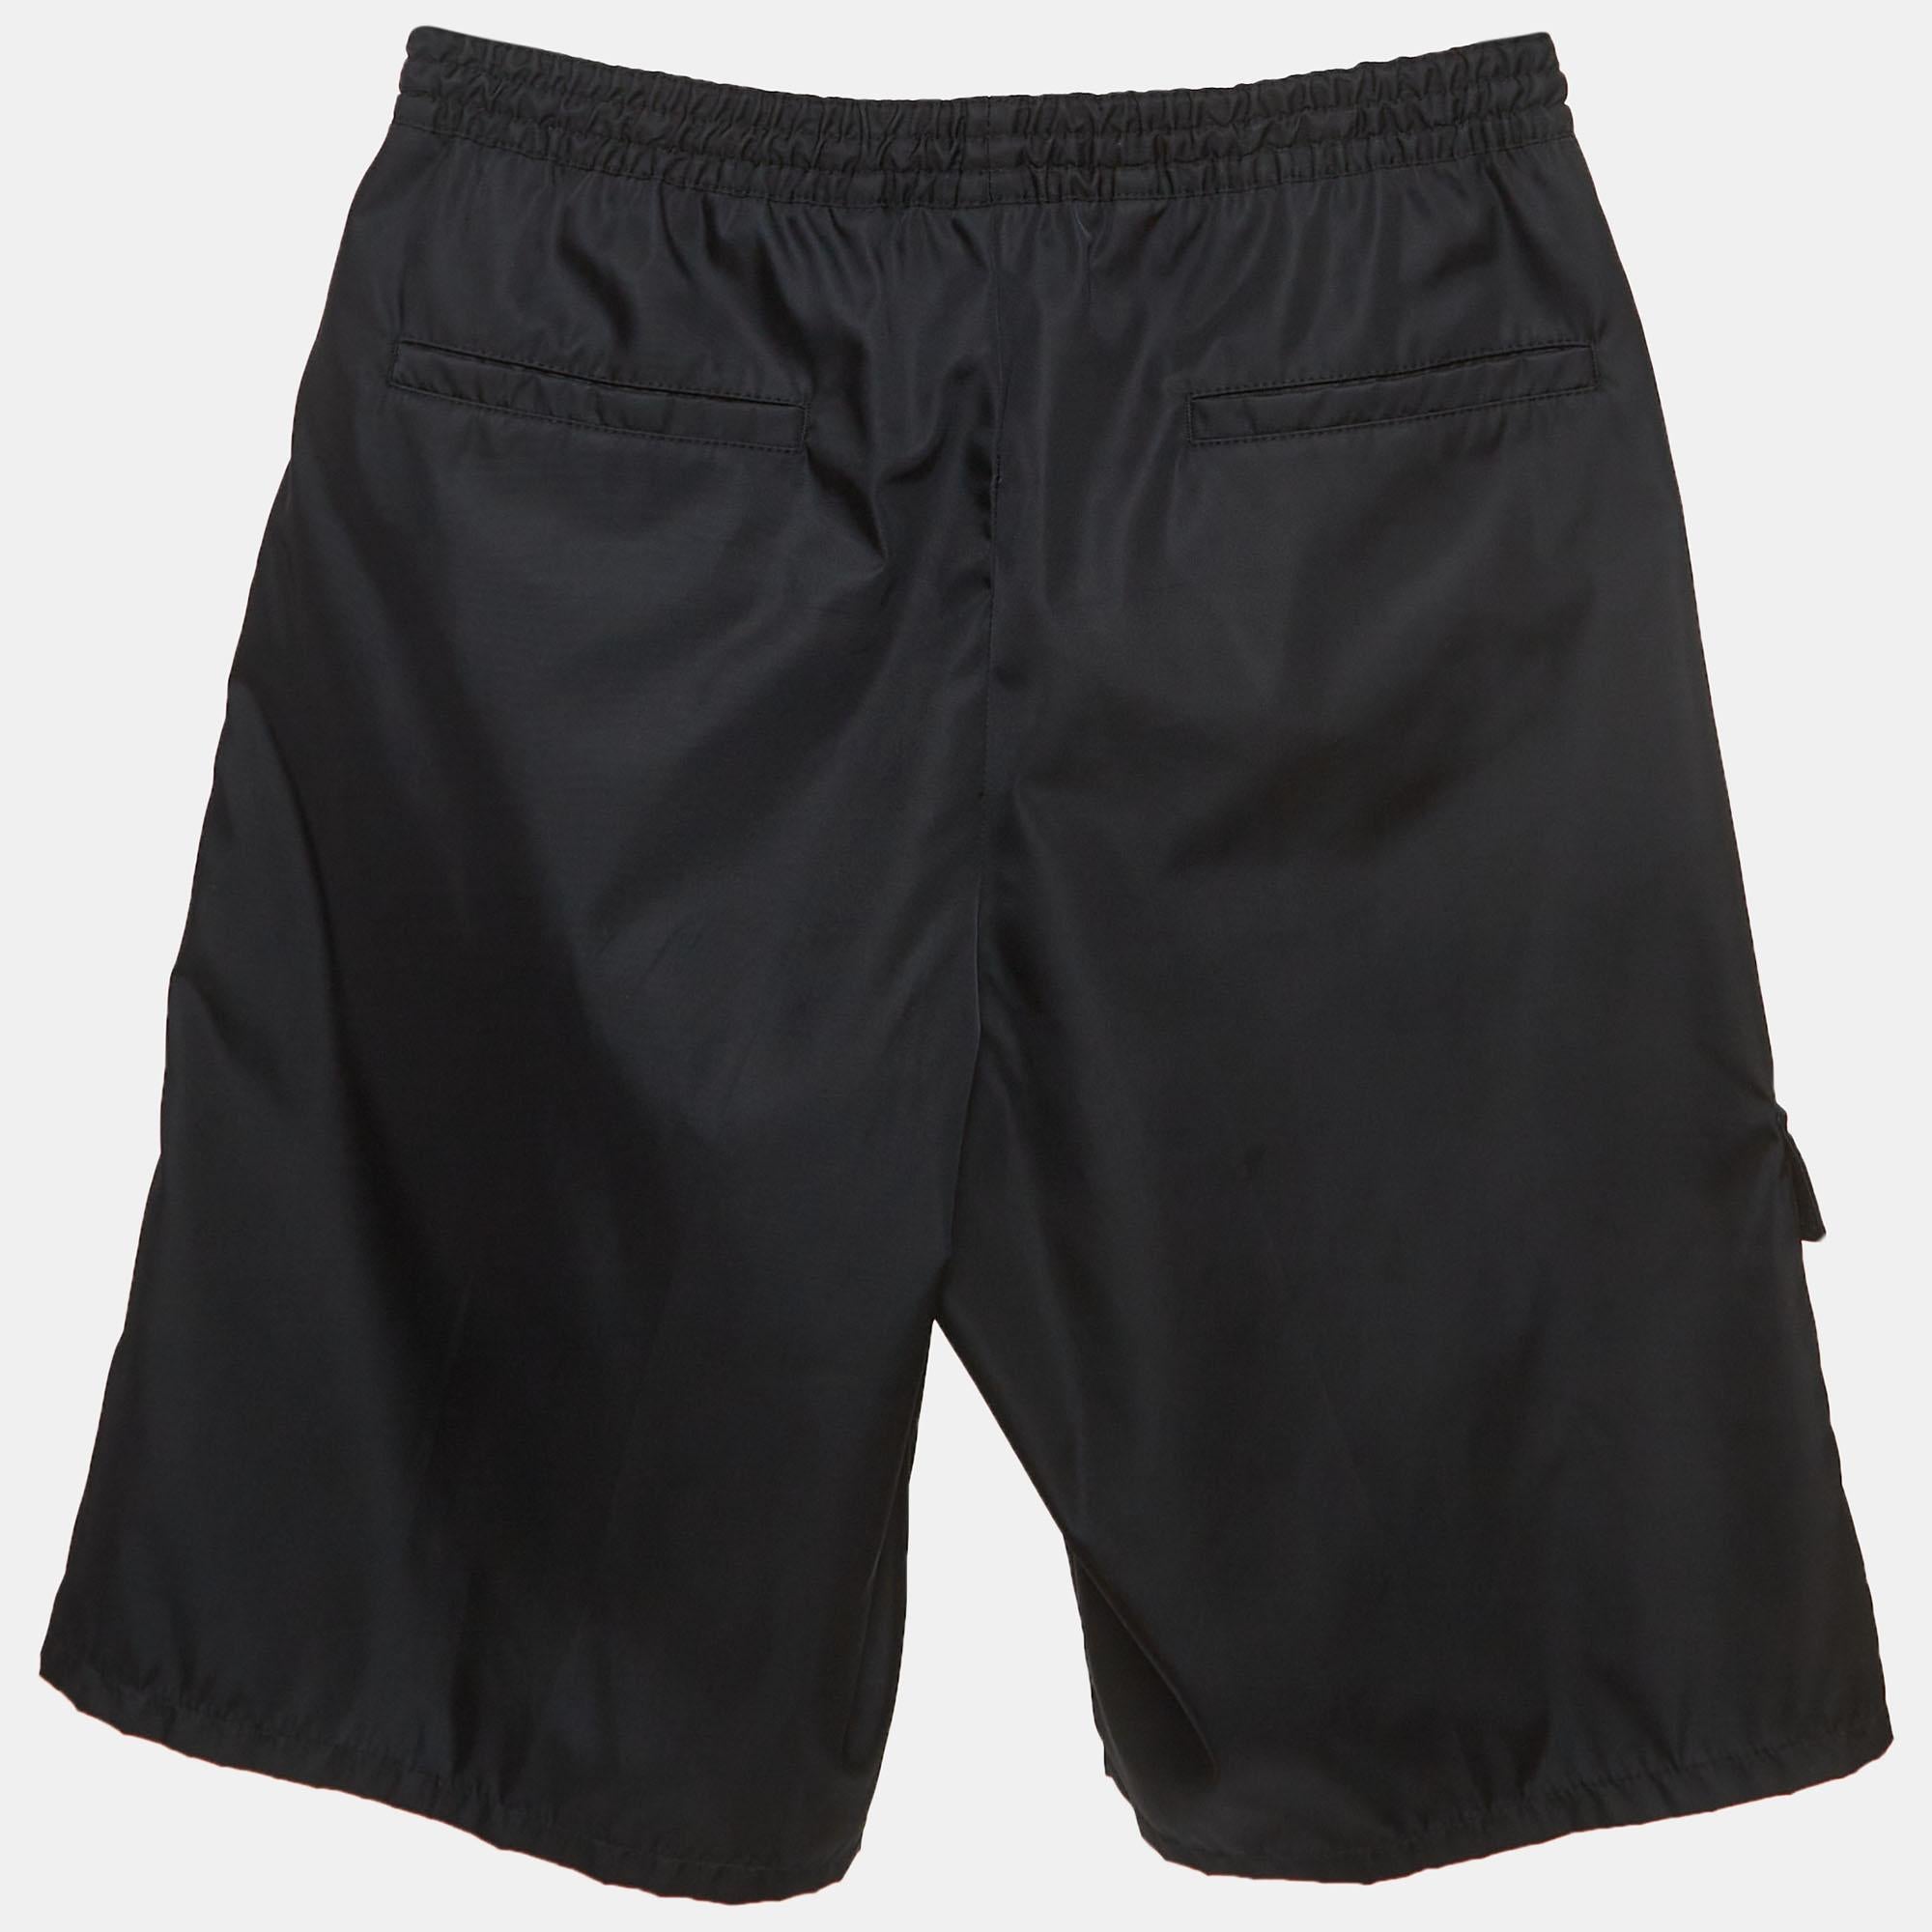 Crafted with meticulous attention to detail, the Prada shorts exude effortless style and practicality. Made from high-quality, sustainable materials, they feature a versatile drawstring waist and Bermuda length, combining comfort with a contemporary